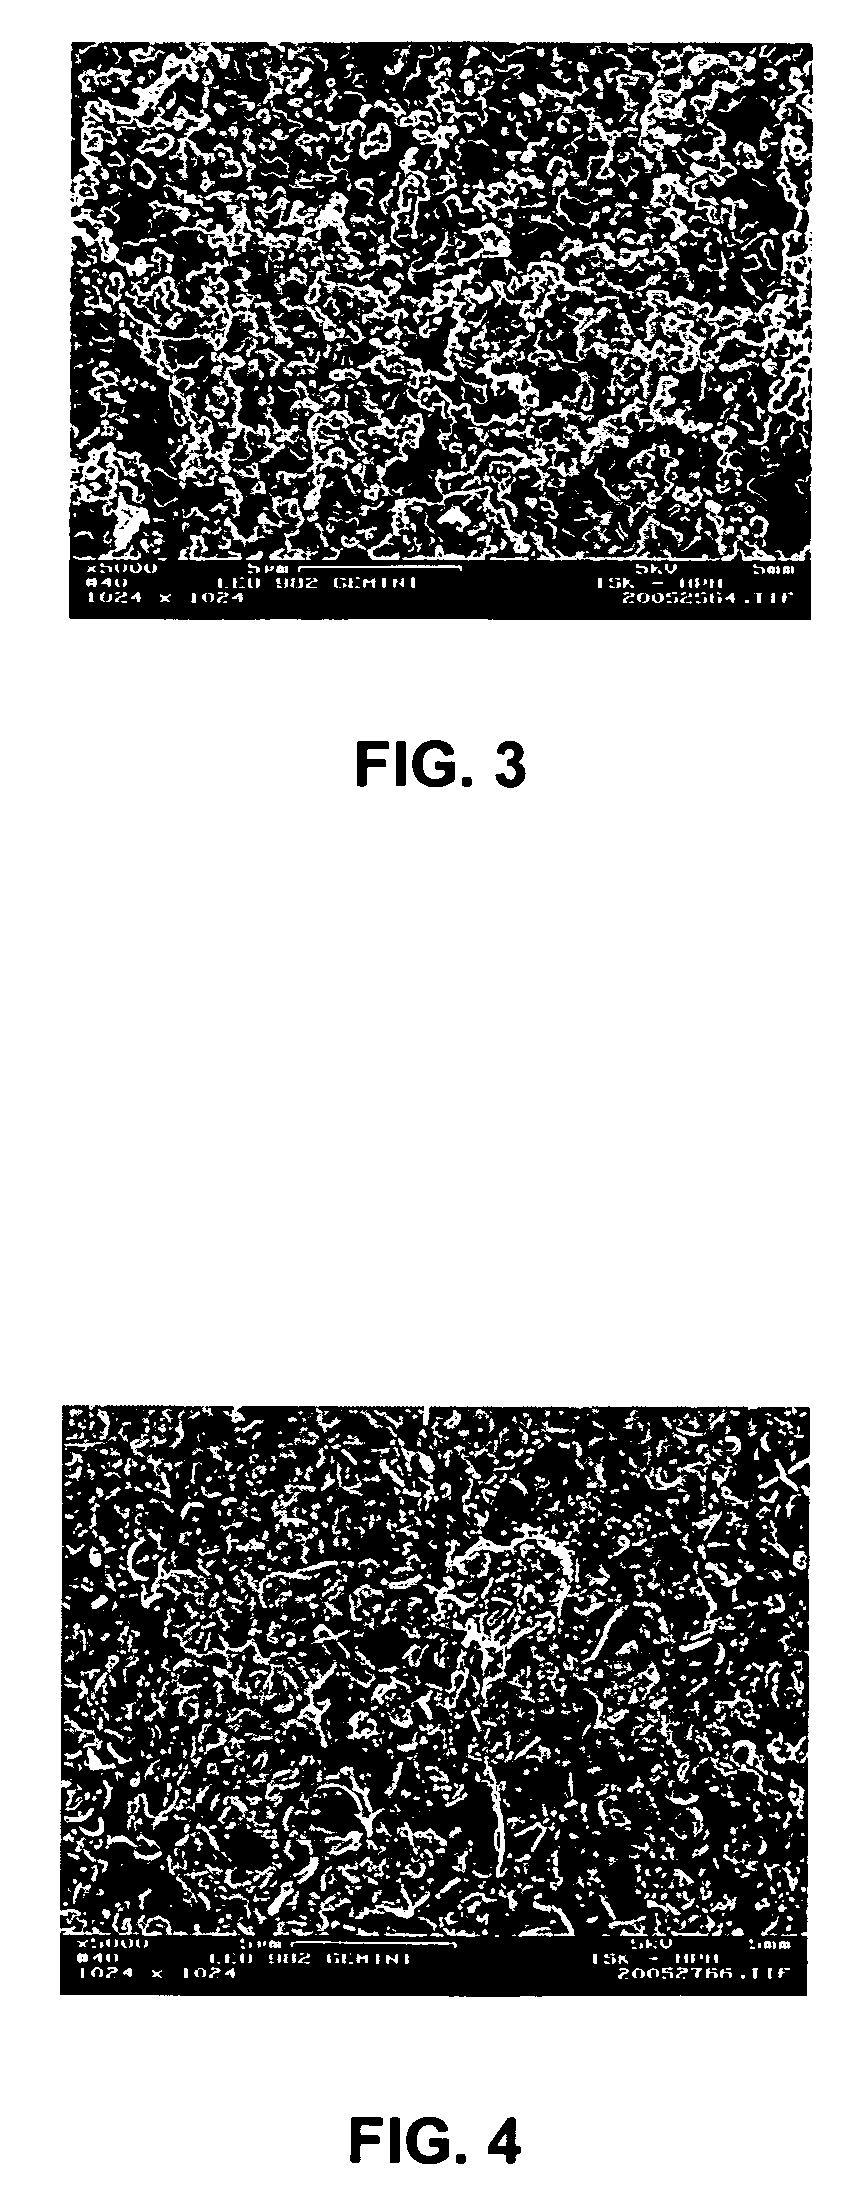 Process for production of porous reticulated composite materials